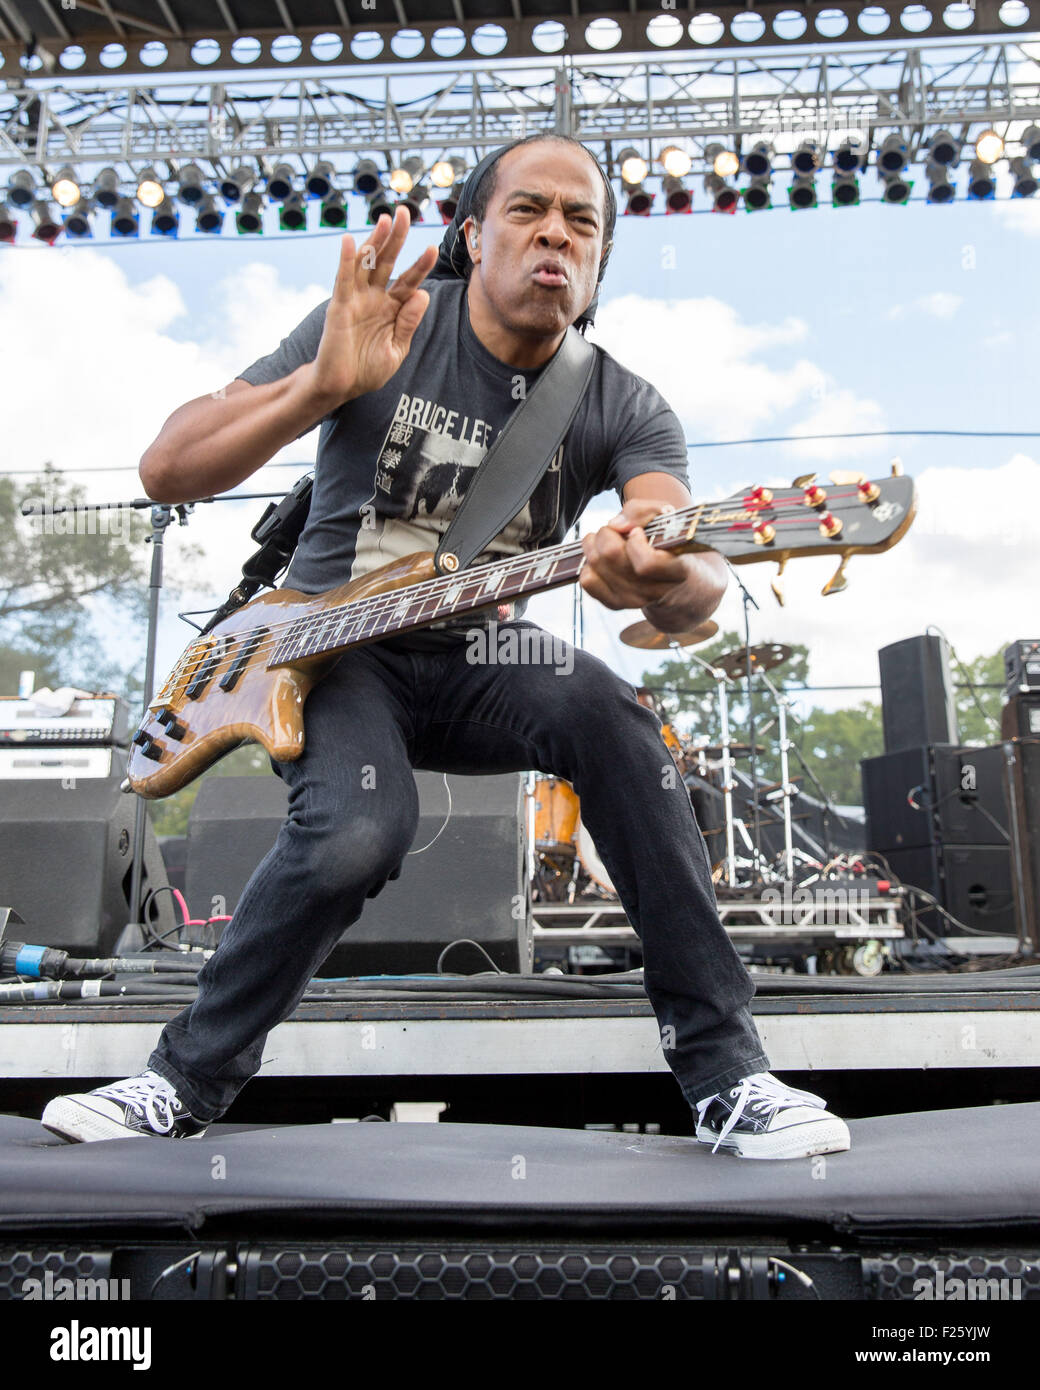 Chicago, Illinois, USA. 11th Sep, 2015. Bassist DOUG WIMBISH of Living Colour performs live during Riot Fest at Douglas Park in Chicago, Illinois Credit:  Daniel DeSlover/ZUMA Wire/Alamy Live News Stock Photo